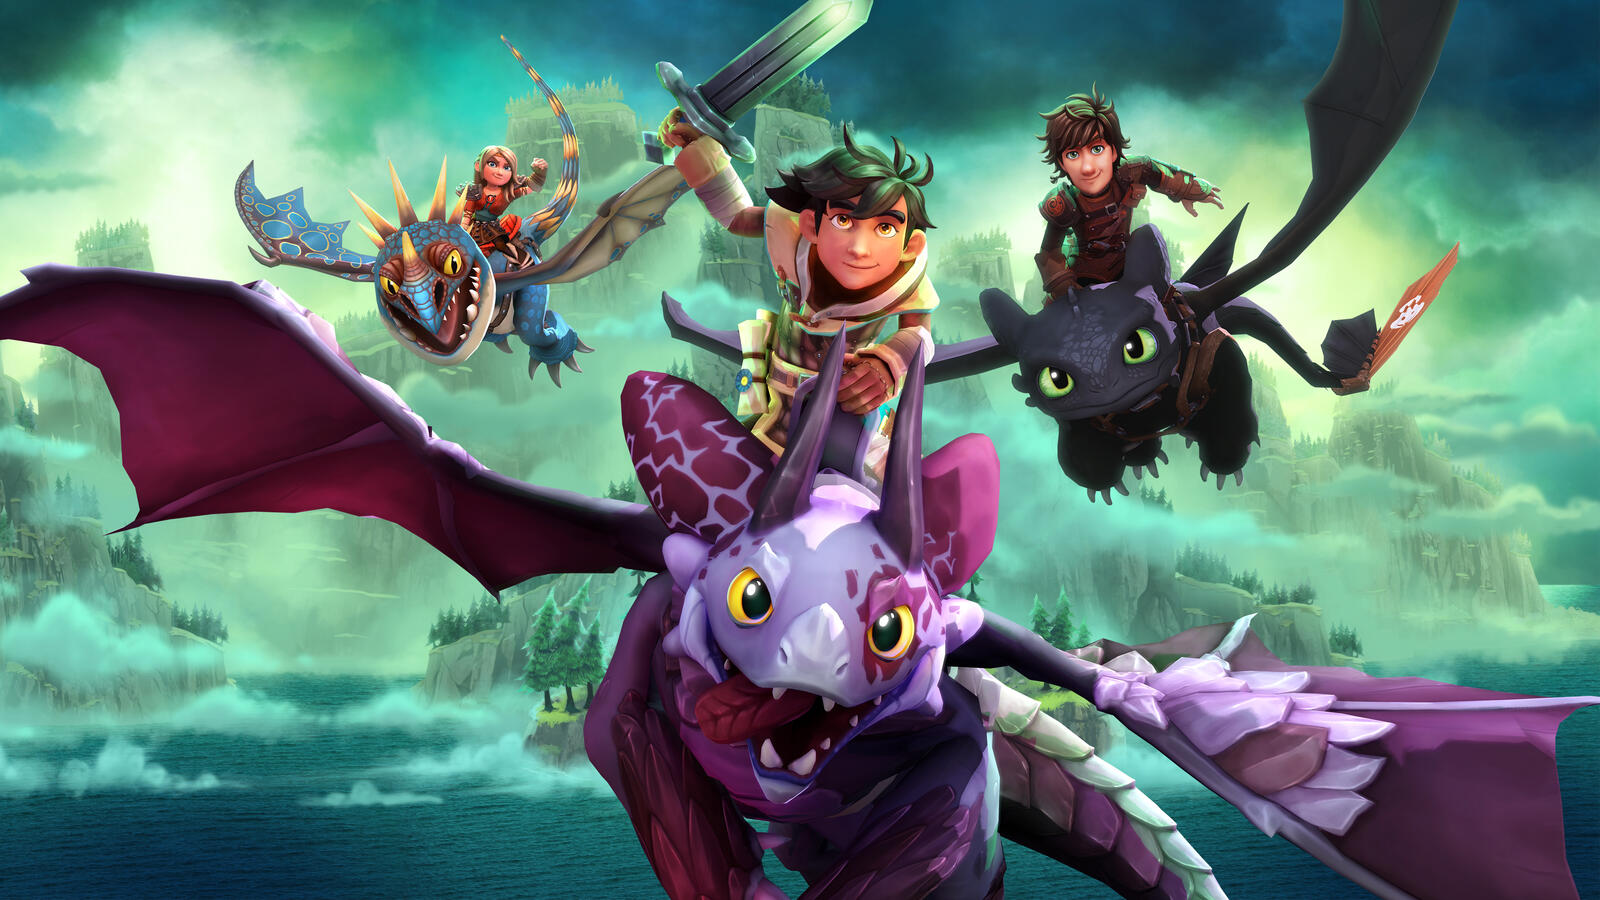 Wallpapers dreamworks dragons dawn of new riders dragons cartoon on the desktop